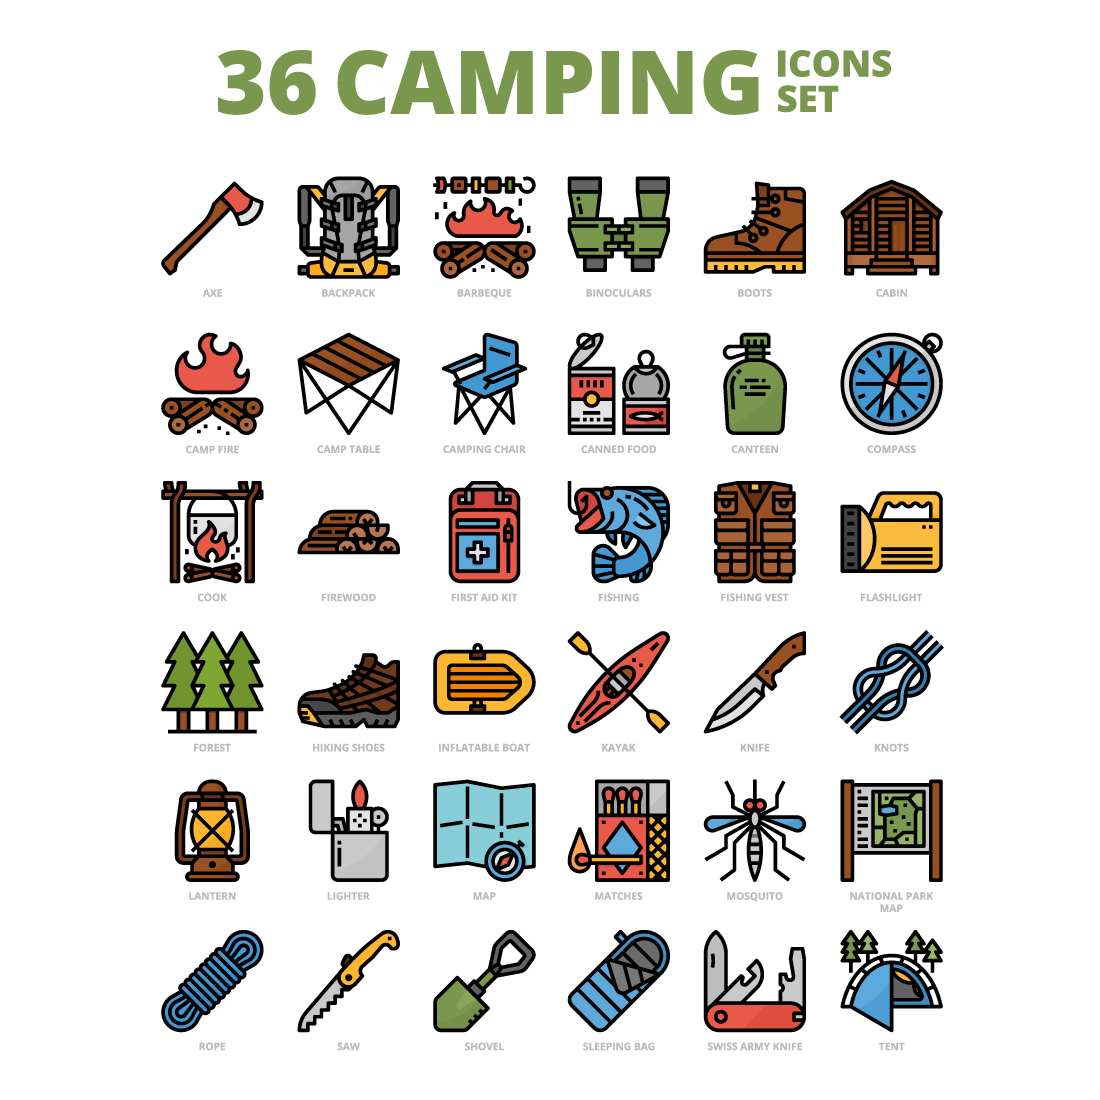 36 Camping Icons Set x 4 Styles cover image.